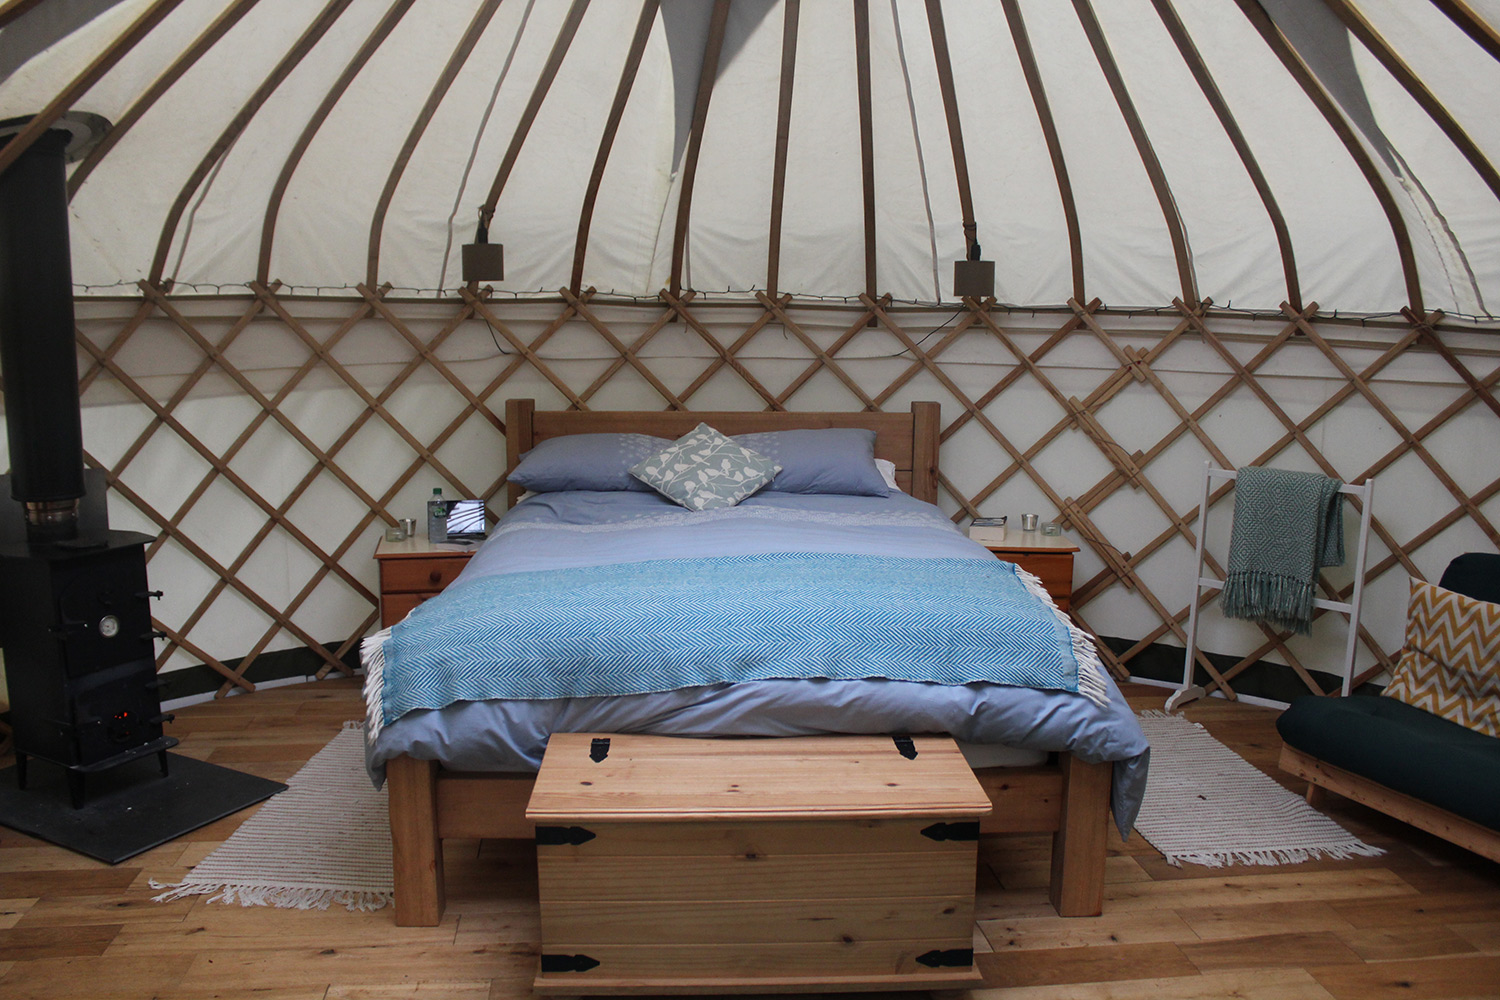 Inside the yurt at Round the Woods